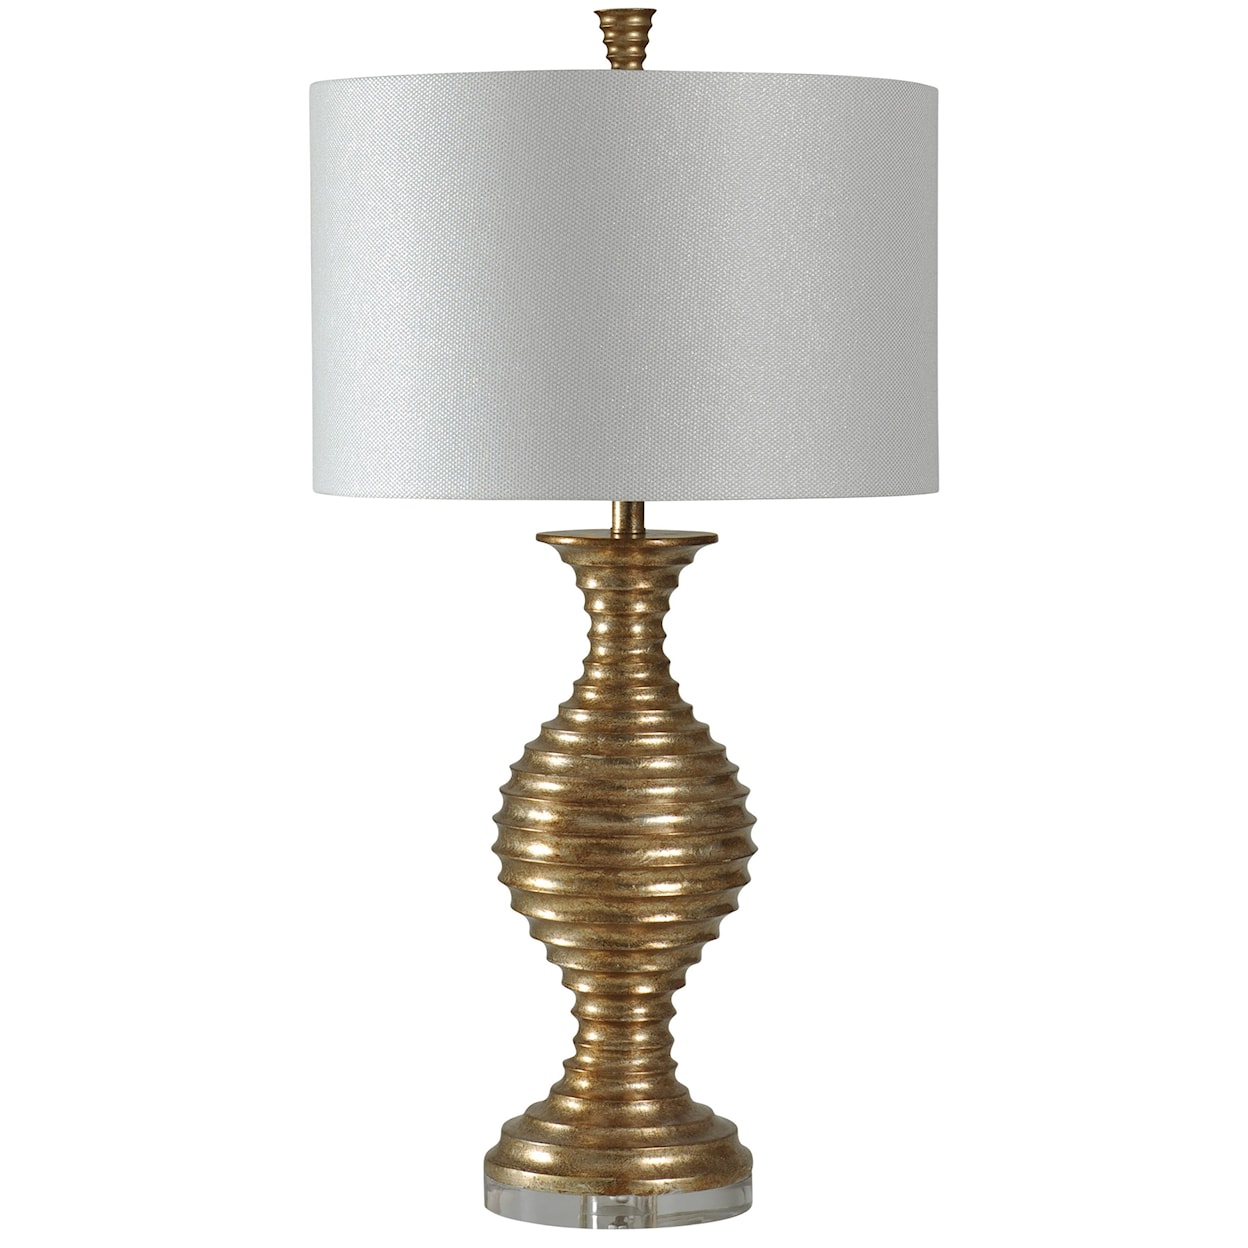 StyleCraft Lamps Contemporary Table Lamp